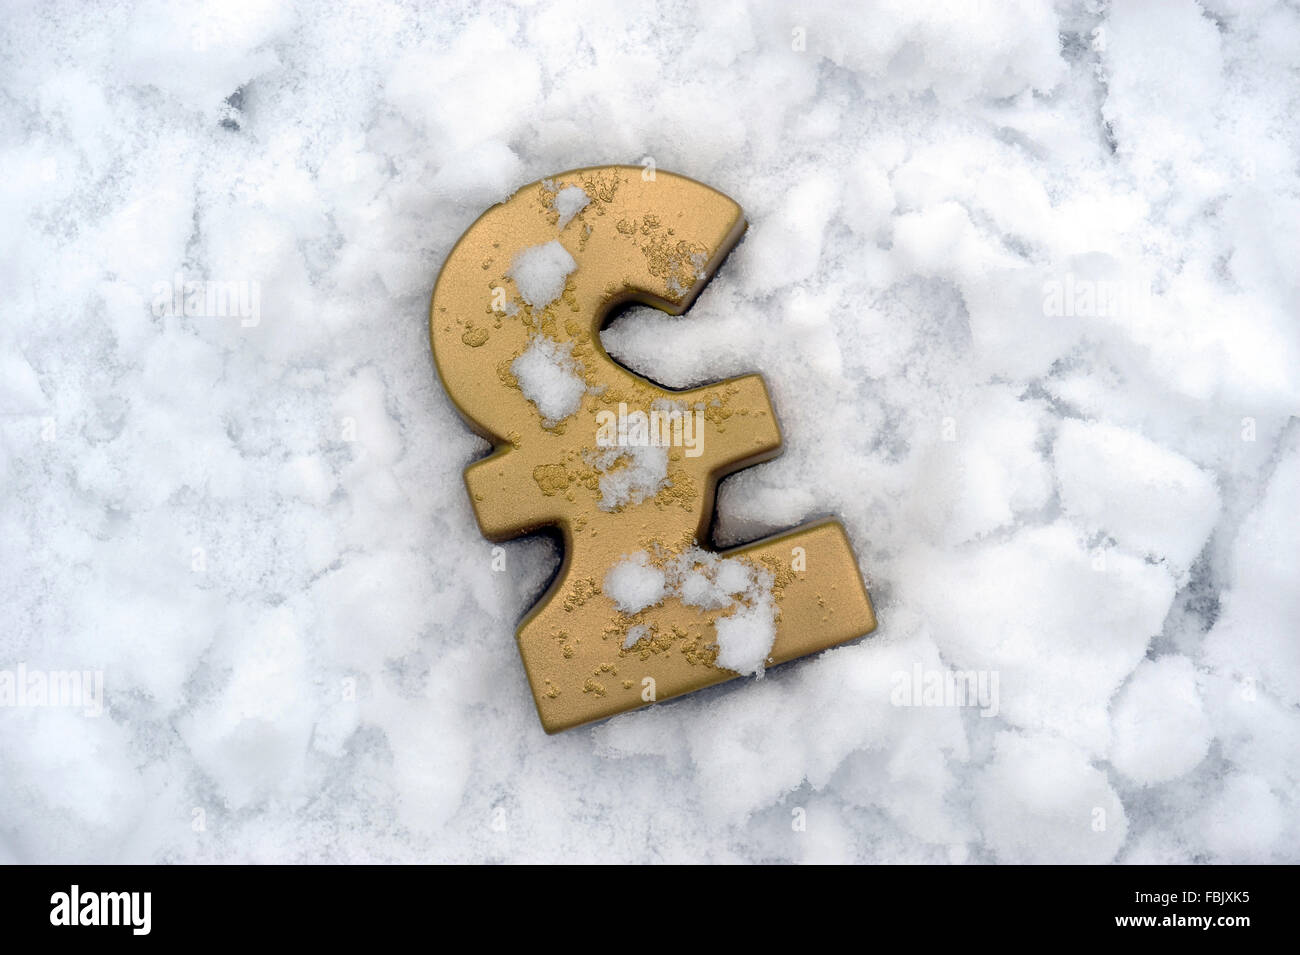 POUND SIGN IN ICE AND SNOW RE COLD WEATHER PAYMENT HOME INSULATION RISING FUEL COSTS HEATING ICE STAYING WARM GAS BILL UK Stock Photo